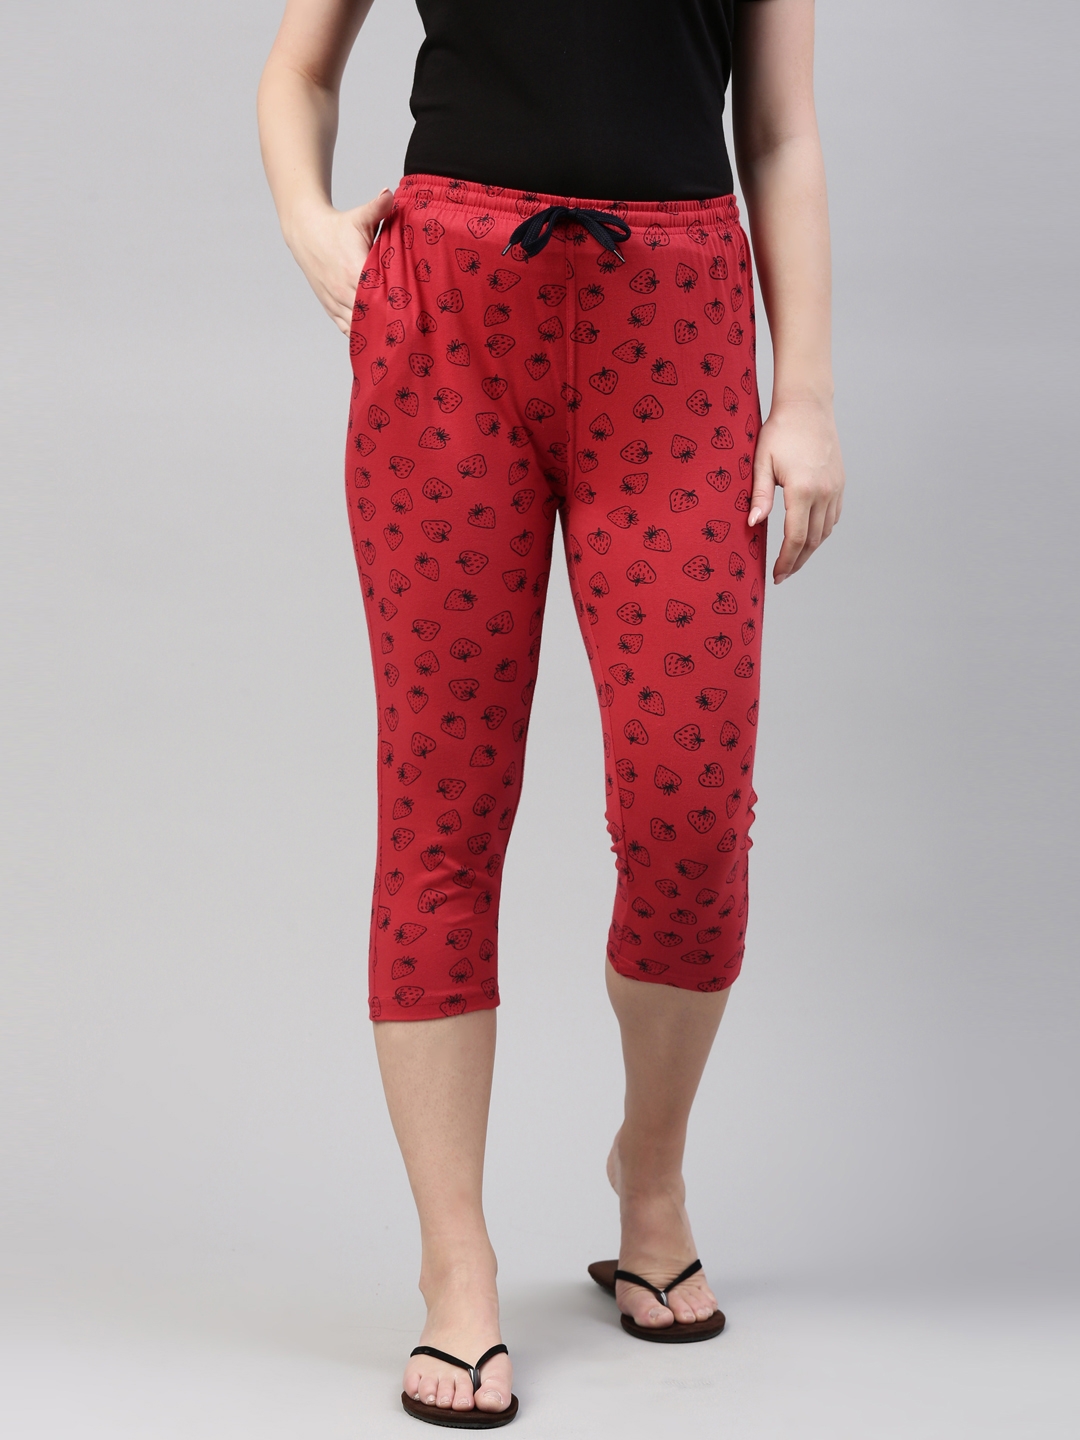 Kryptic | Kryptic Womens Casual 100% Cotton Printed Capris